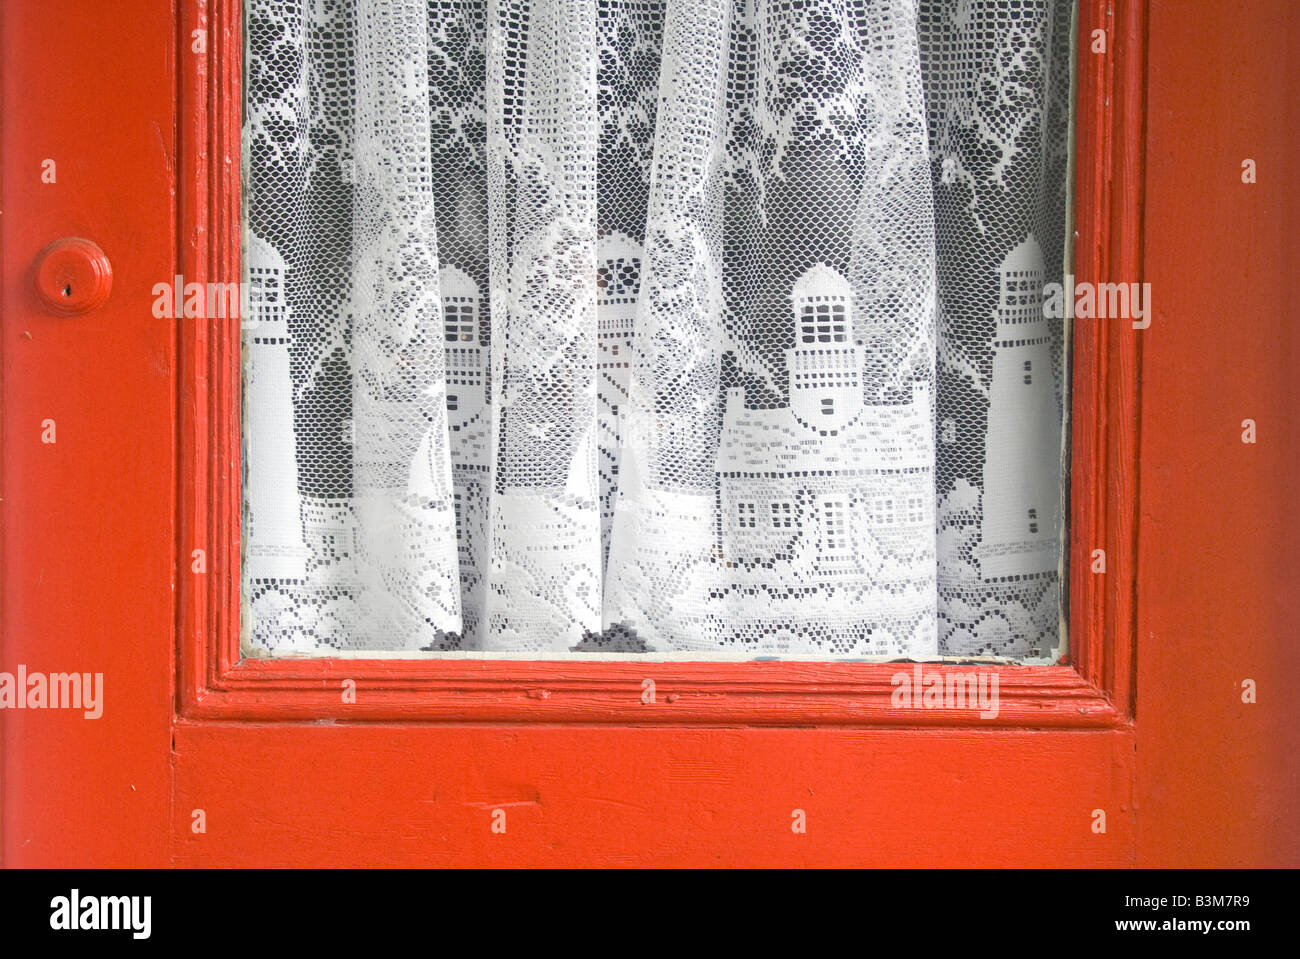 Net curtains decorated with a lighthouse motif in Oak Bluffs Martha s Vineyard Stock Photo